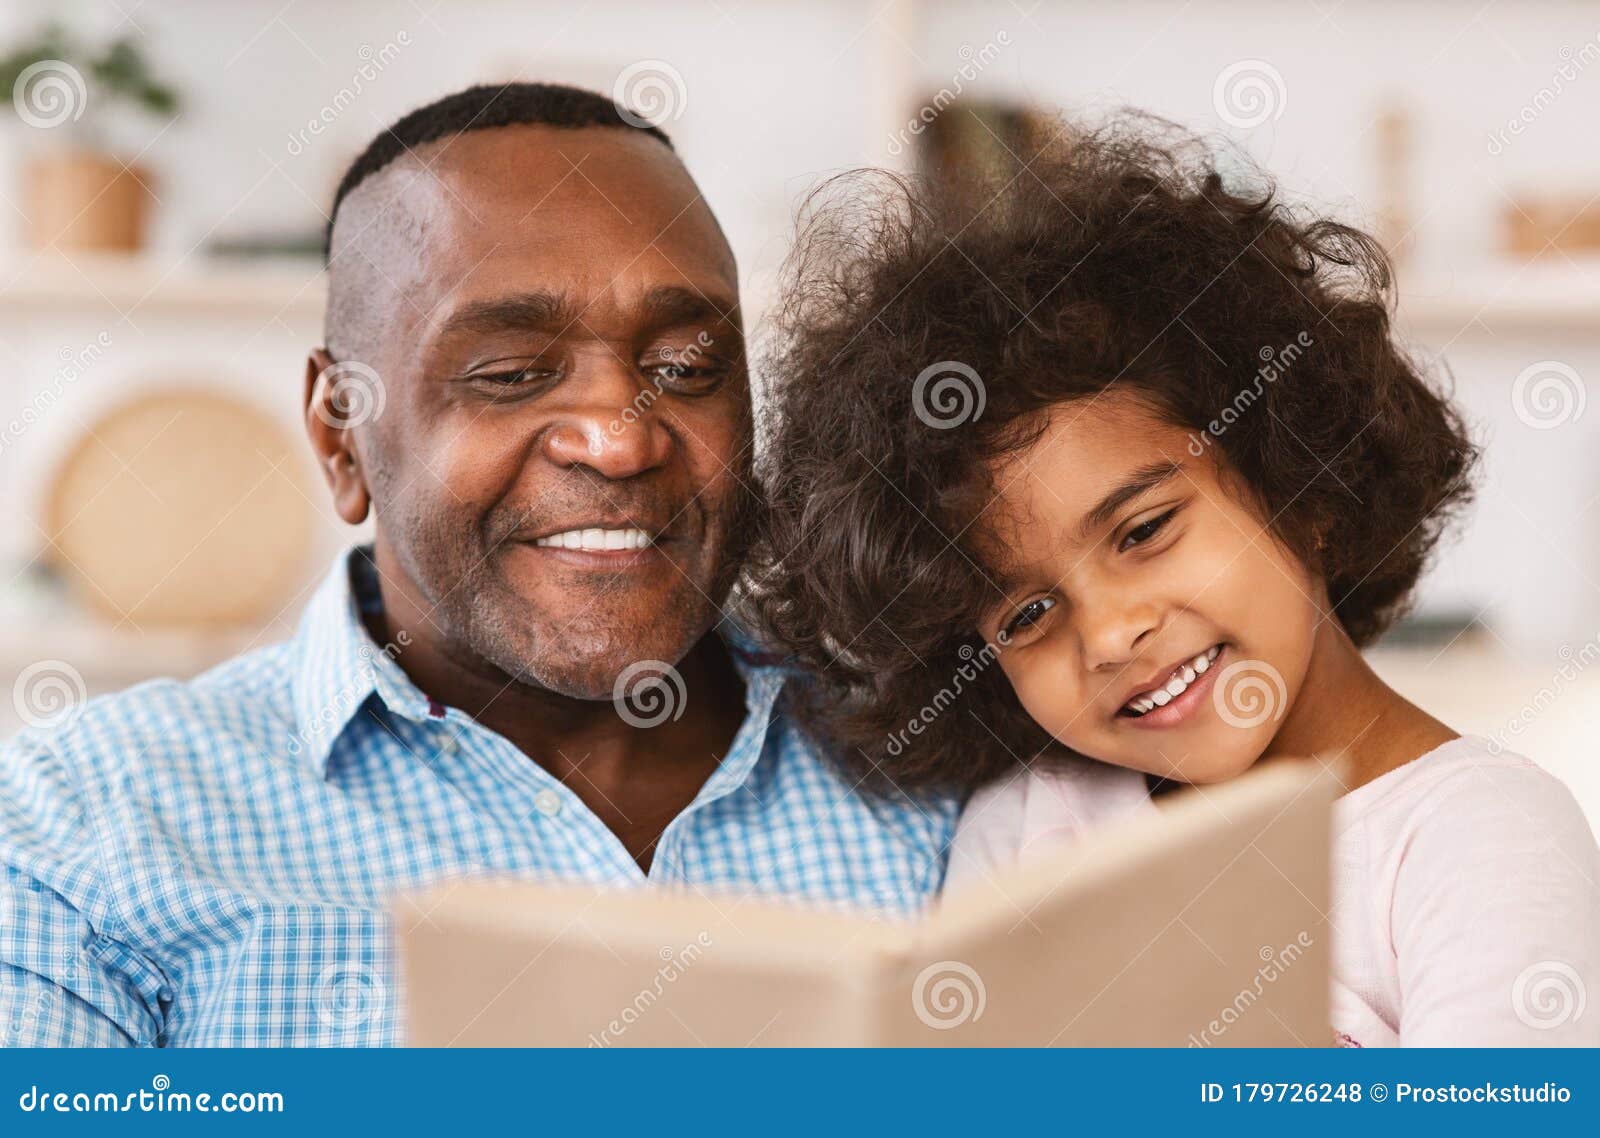 family lockdown hobbies. african american child listening to her grandfather read bedtime story at home